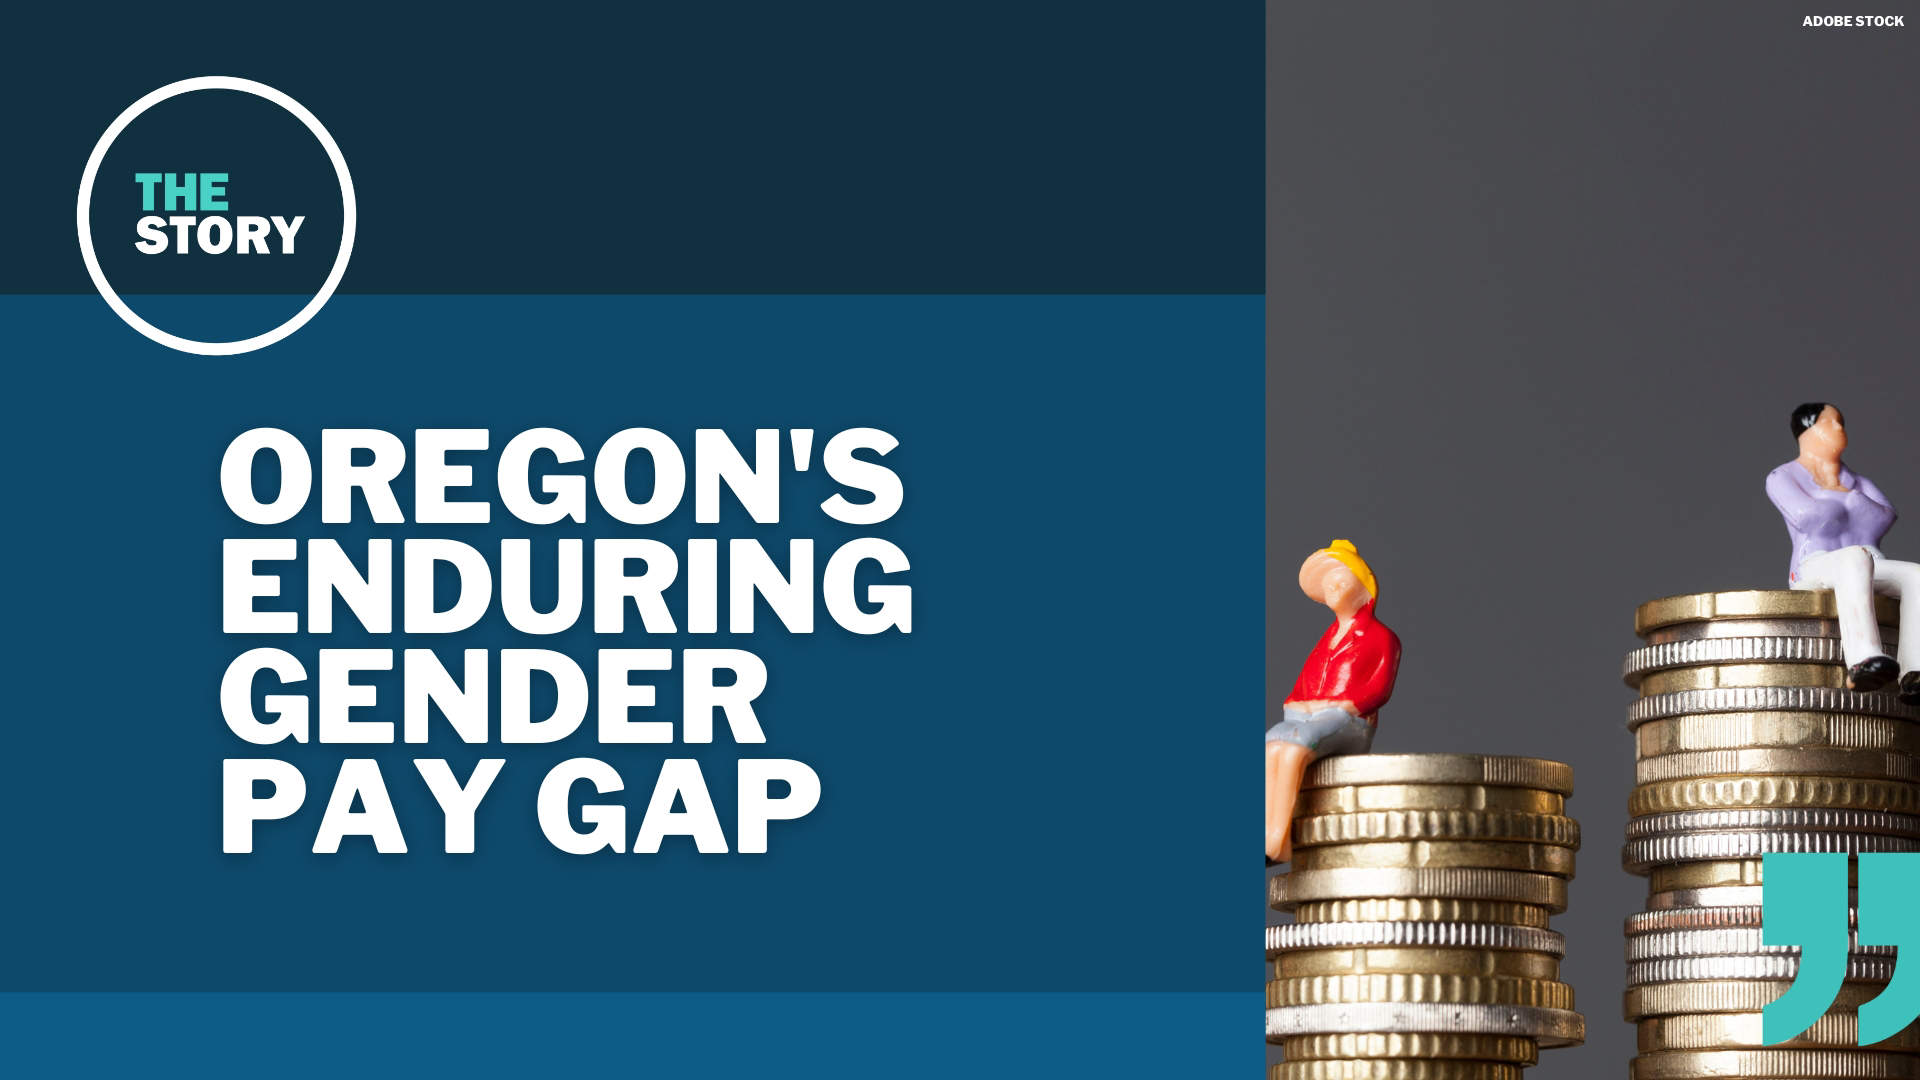 Oregon passed the “Pay Equity Bill” six years ago. A recent audit found that the gap has remained exactly the same ever since.